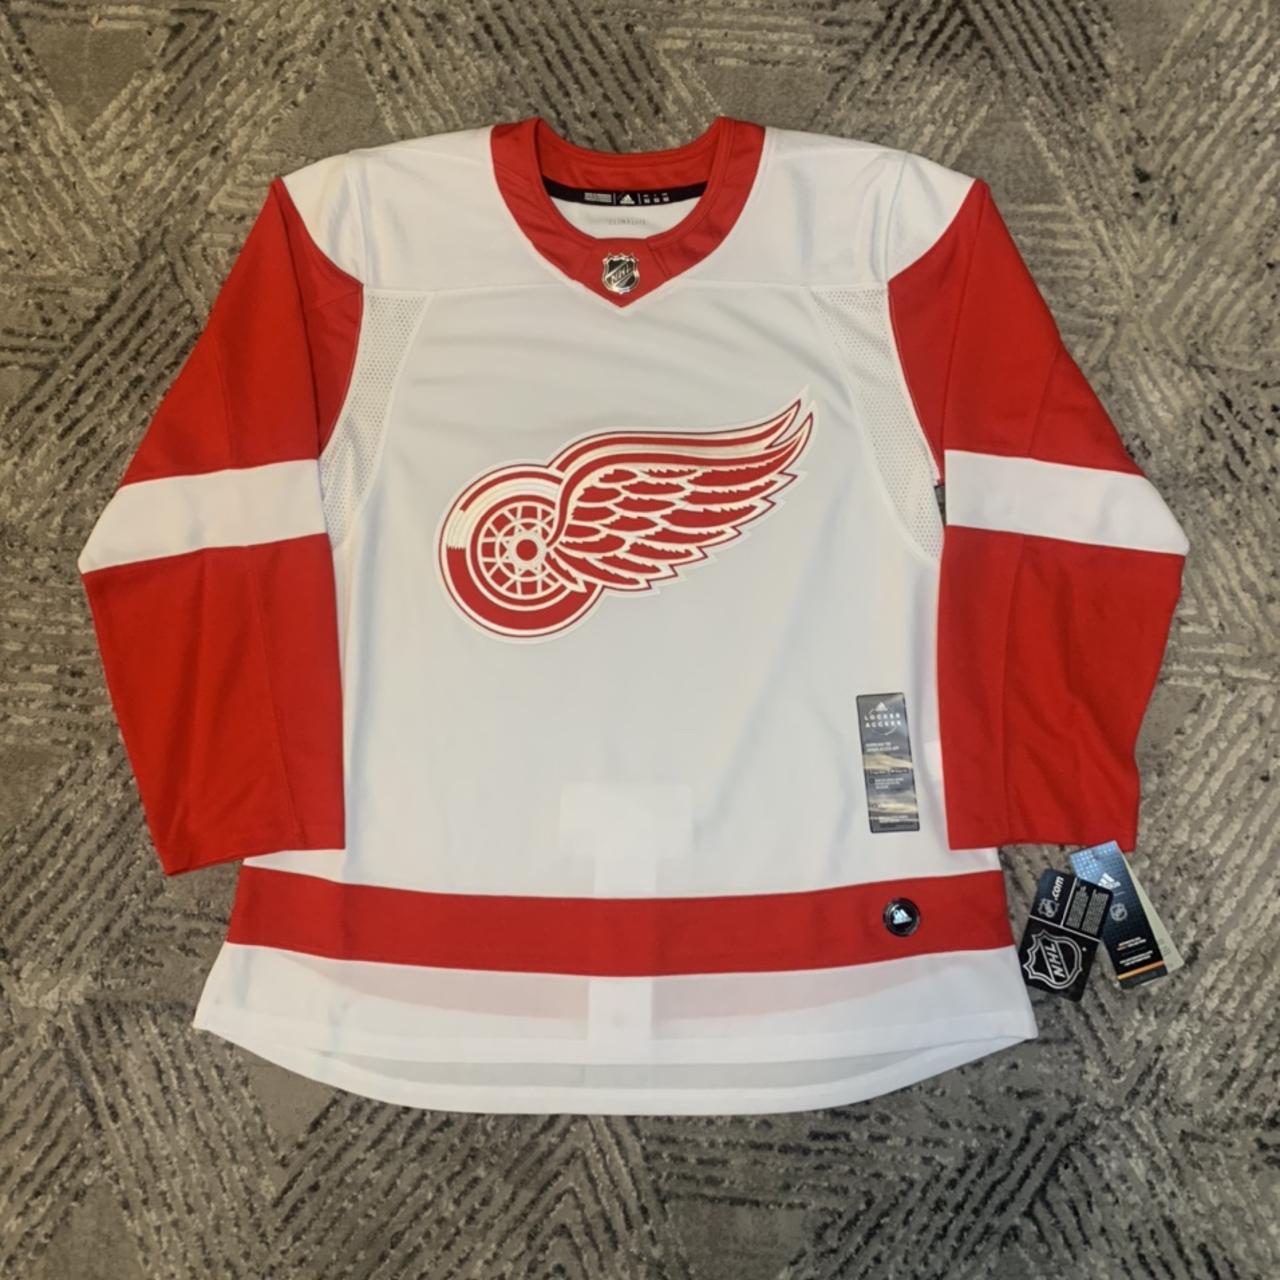 Authentic Adidas Pro Detroit Red Wings Jersey